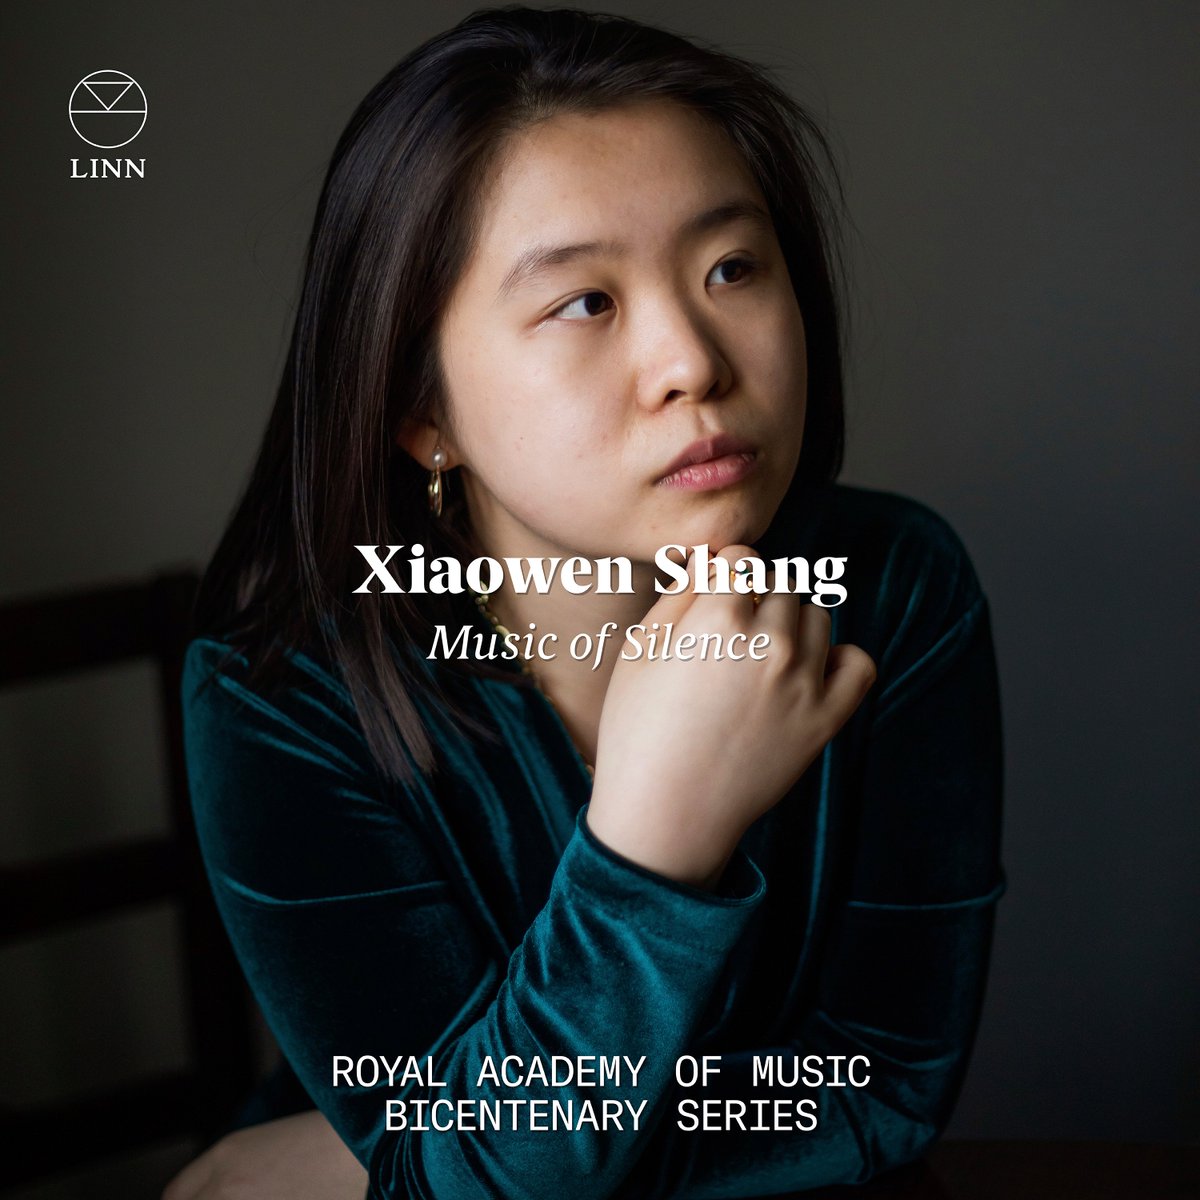 Tune into @BBCInTune today to hear Xiaowen Shang perform music from her new @RoyalAcadMusic Bicentenary Series album which is out on Friday. Plus the pianist will chat about her @wigmore_hall concert on 17 April, which features works from Music of Silence. lnk.to/MusicOfSilence…